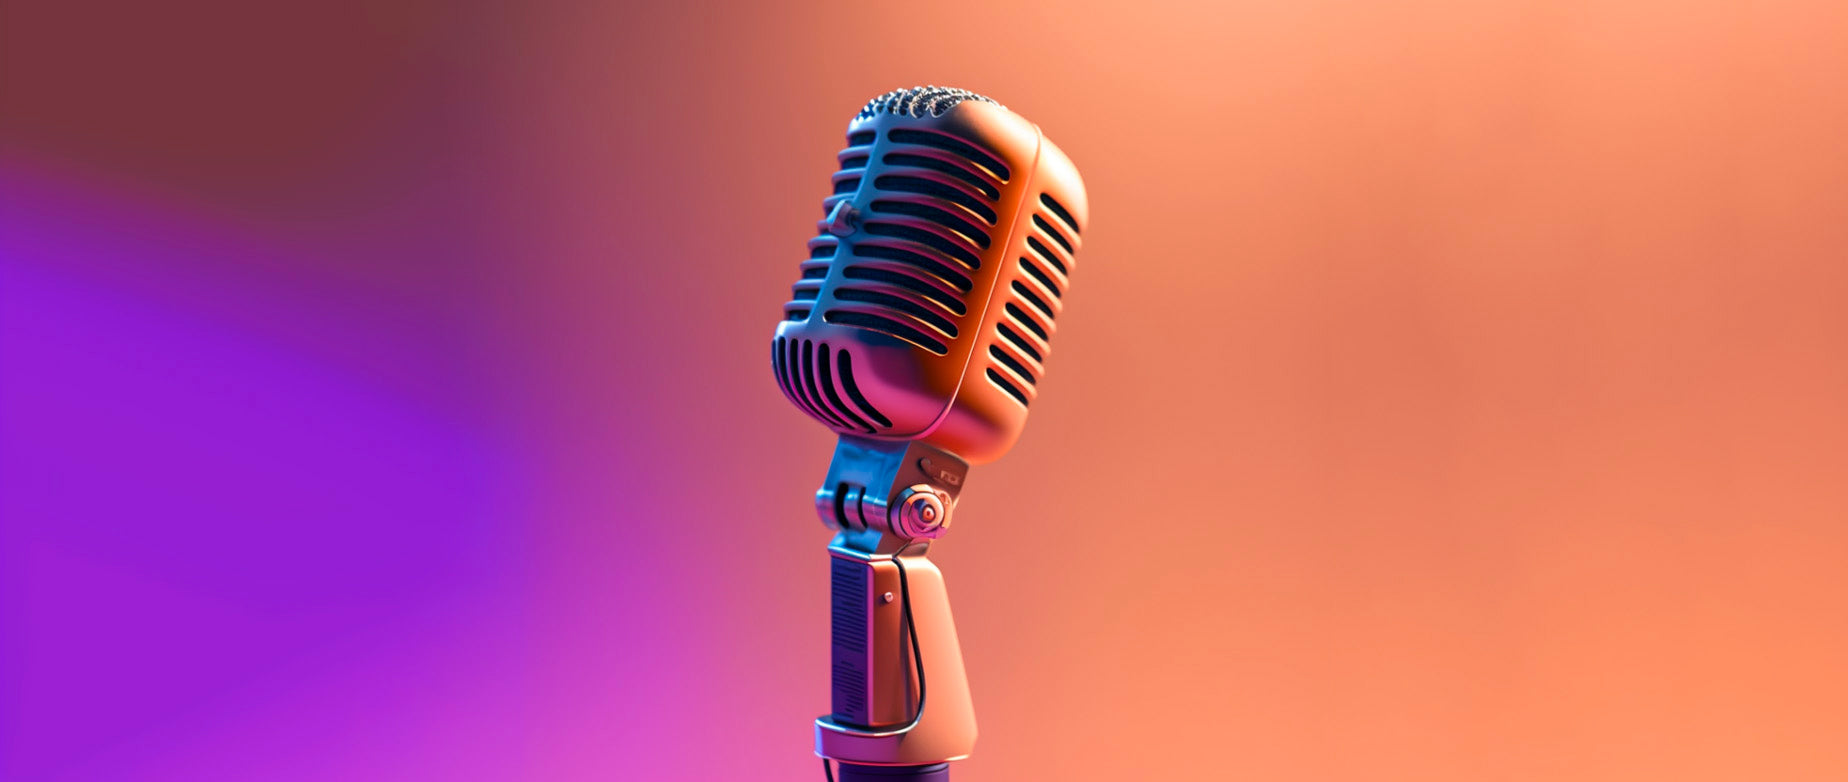 a microphone against a purple and orange background: voice of the customer